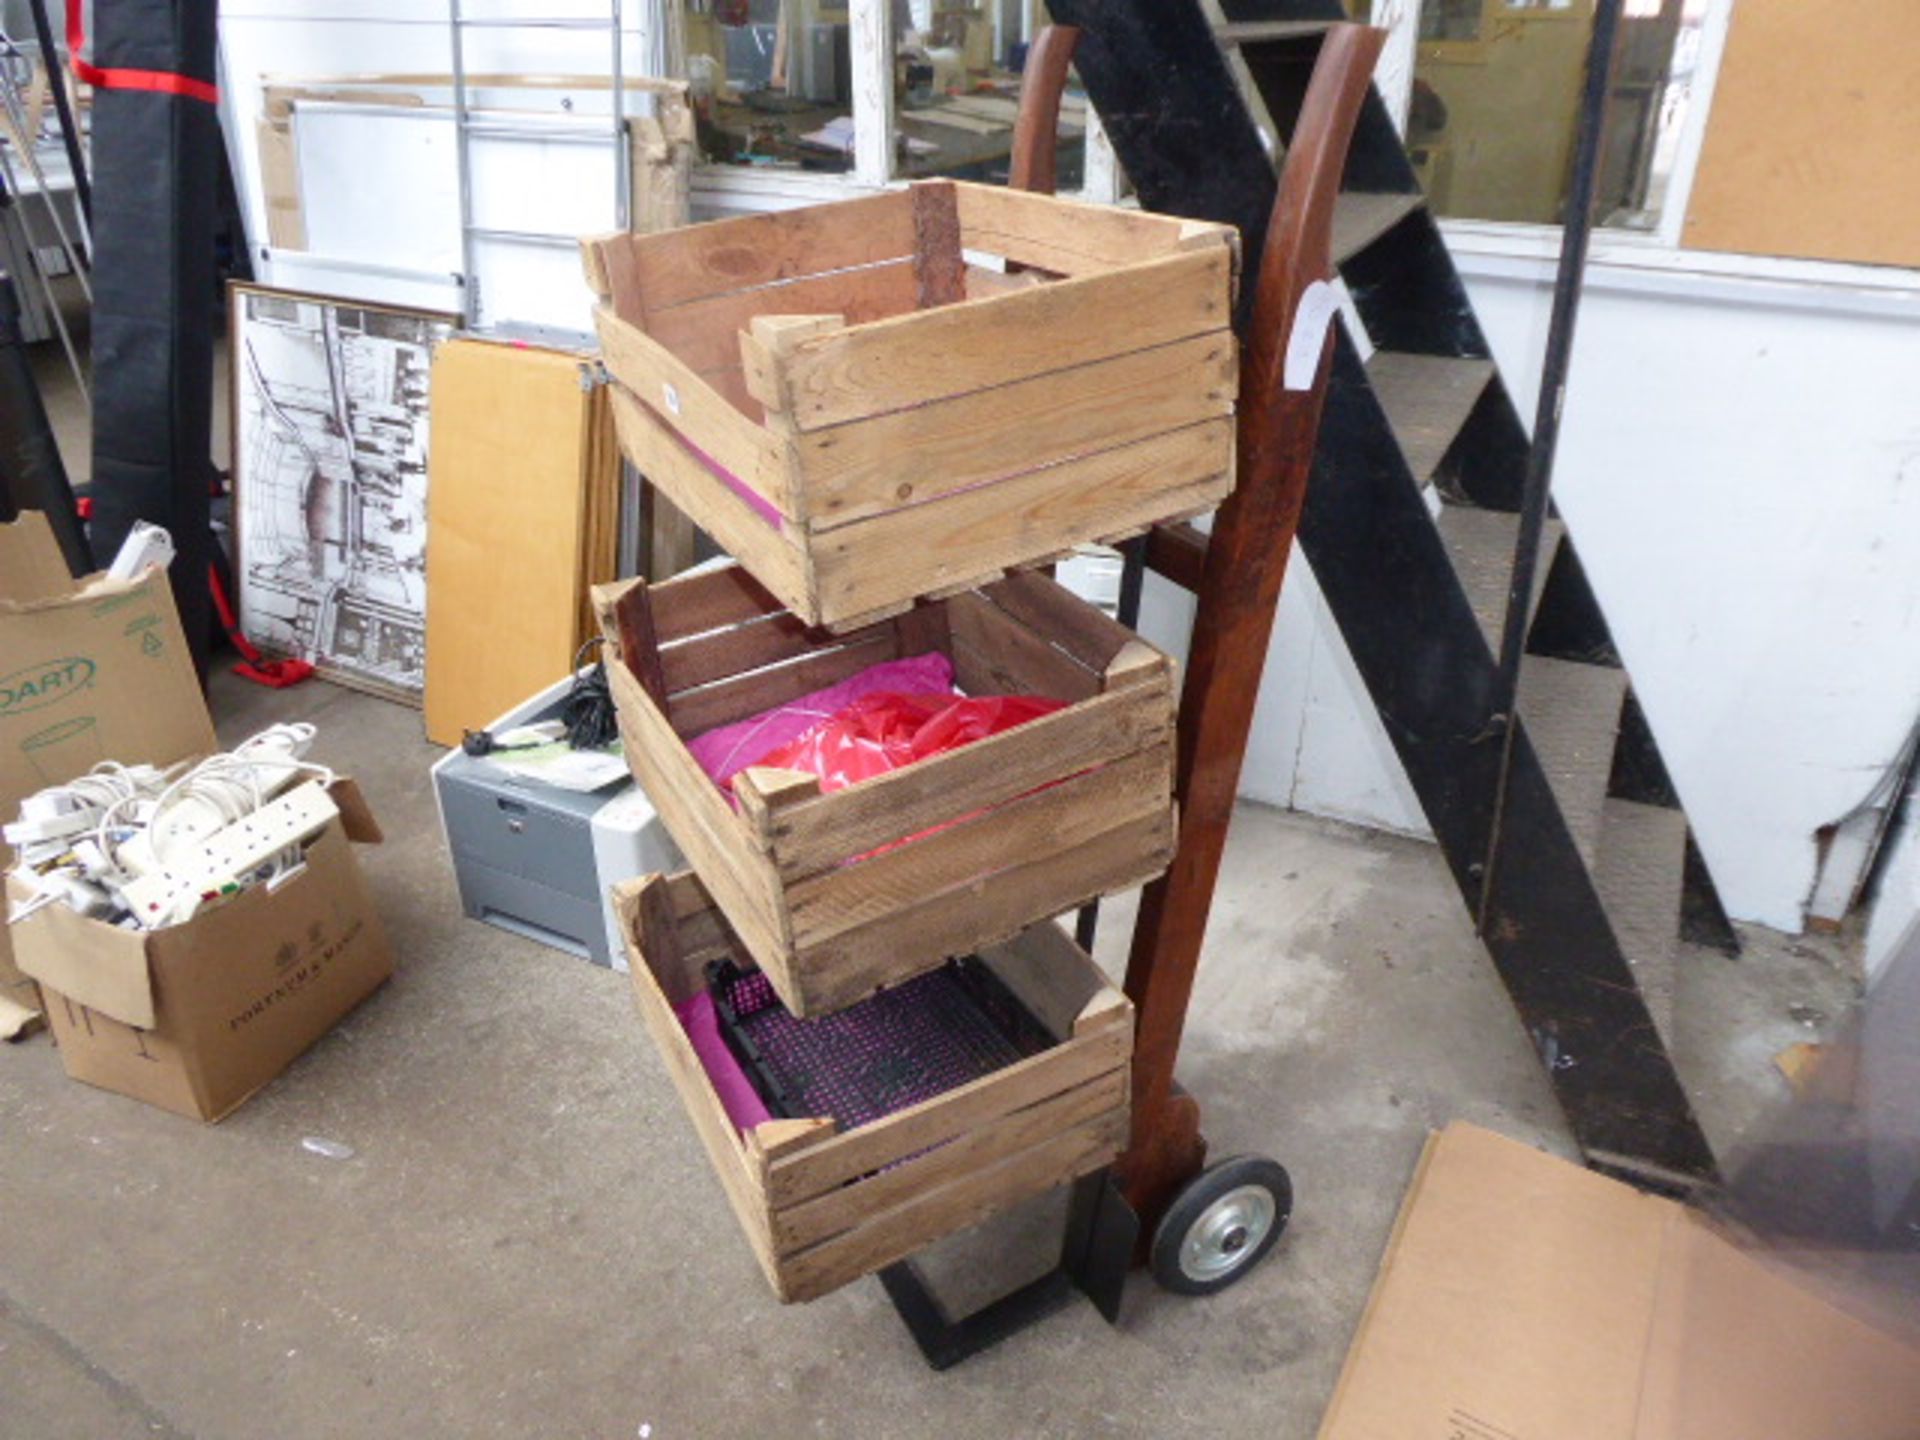 Point of sale in the style of an old sack barrow and 3 potato crates